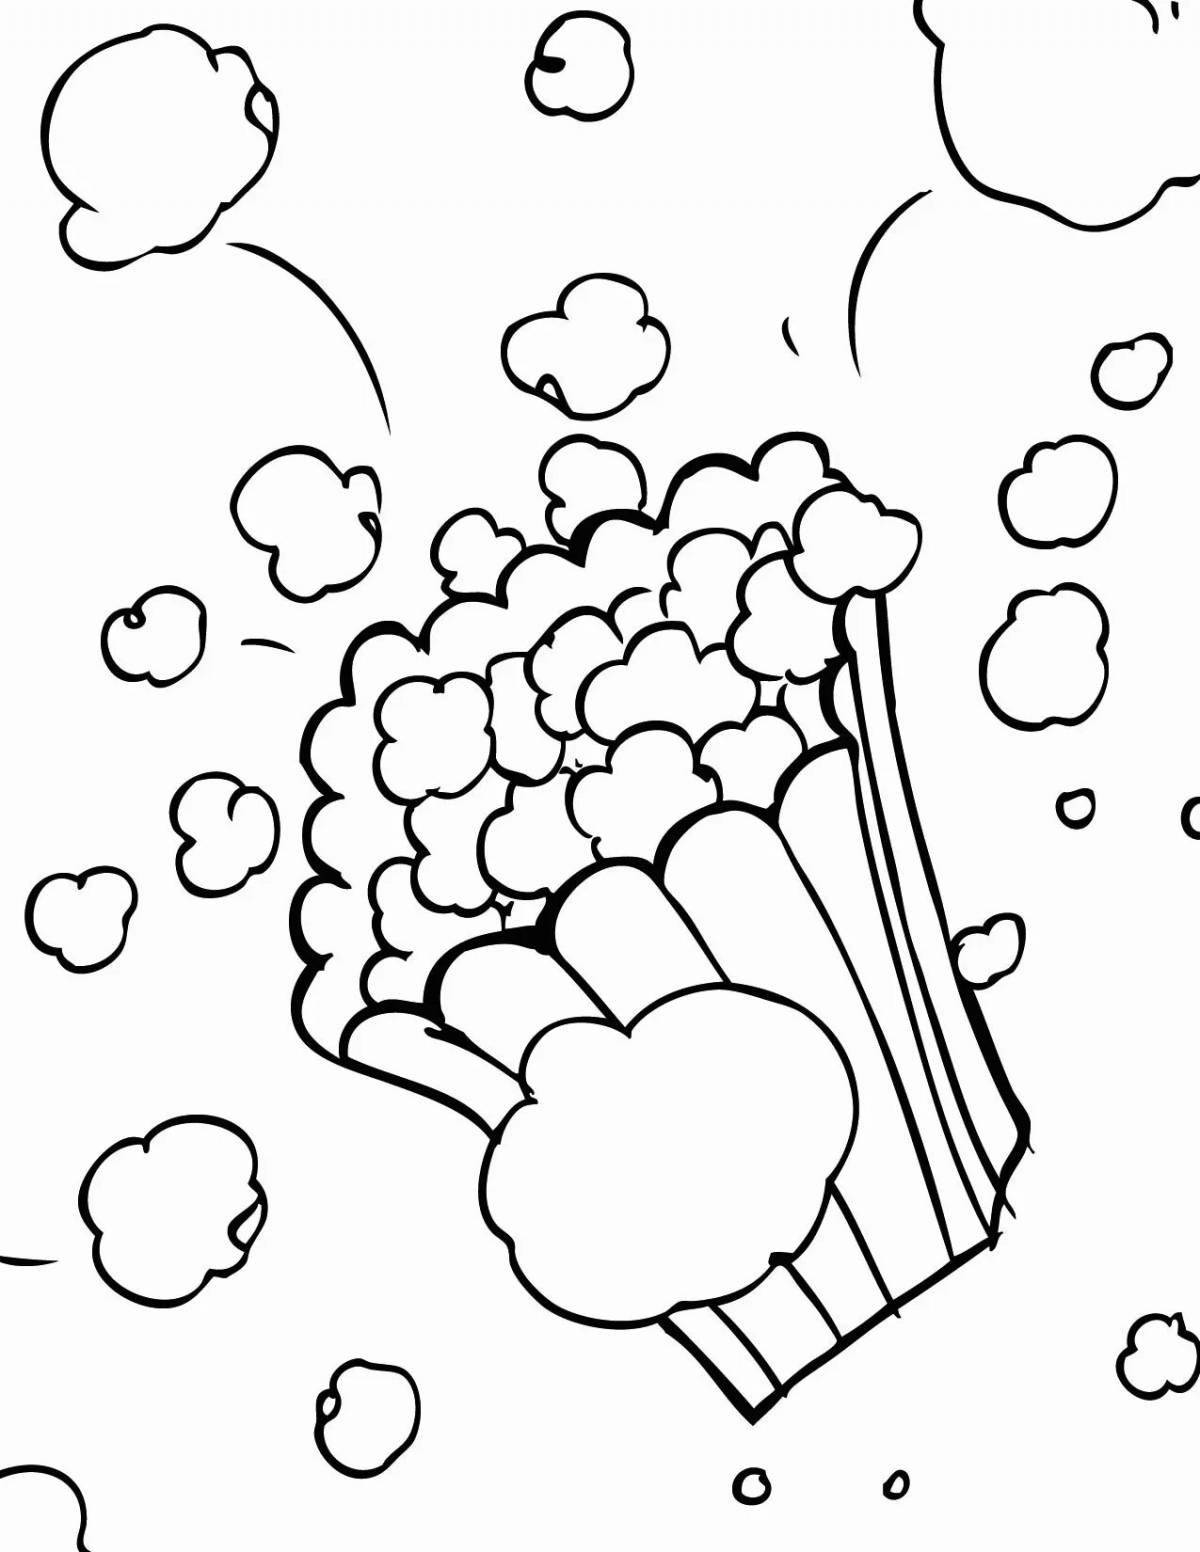 Fabulous popcorn coloring book for kids